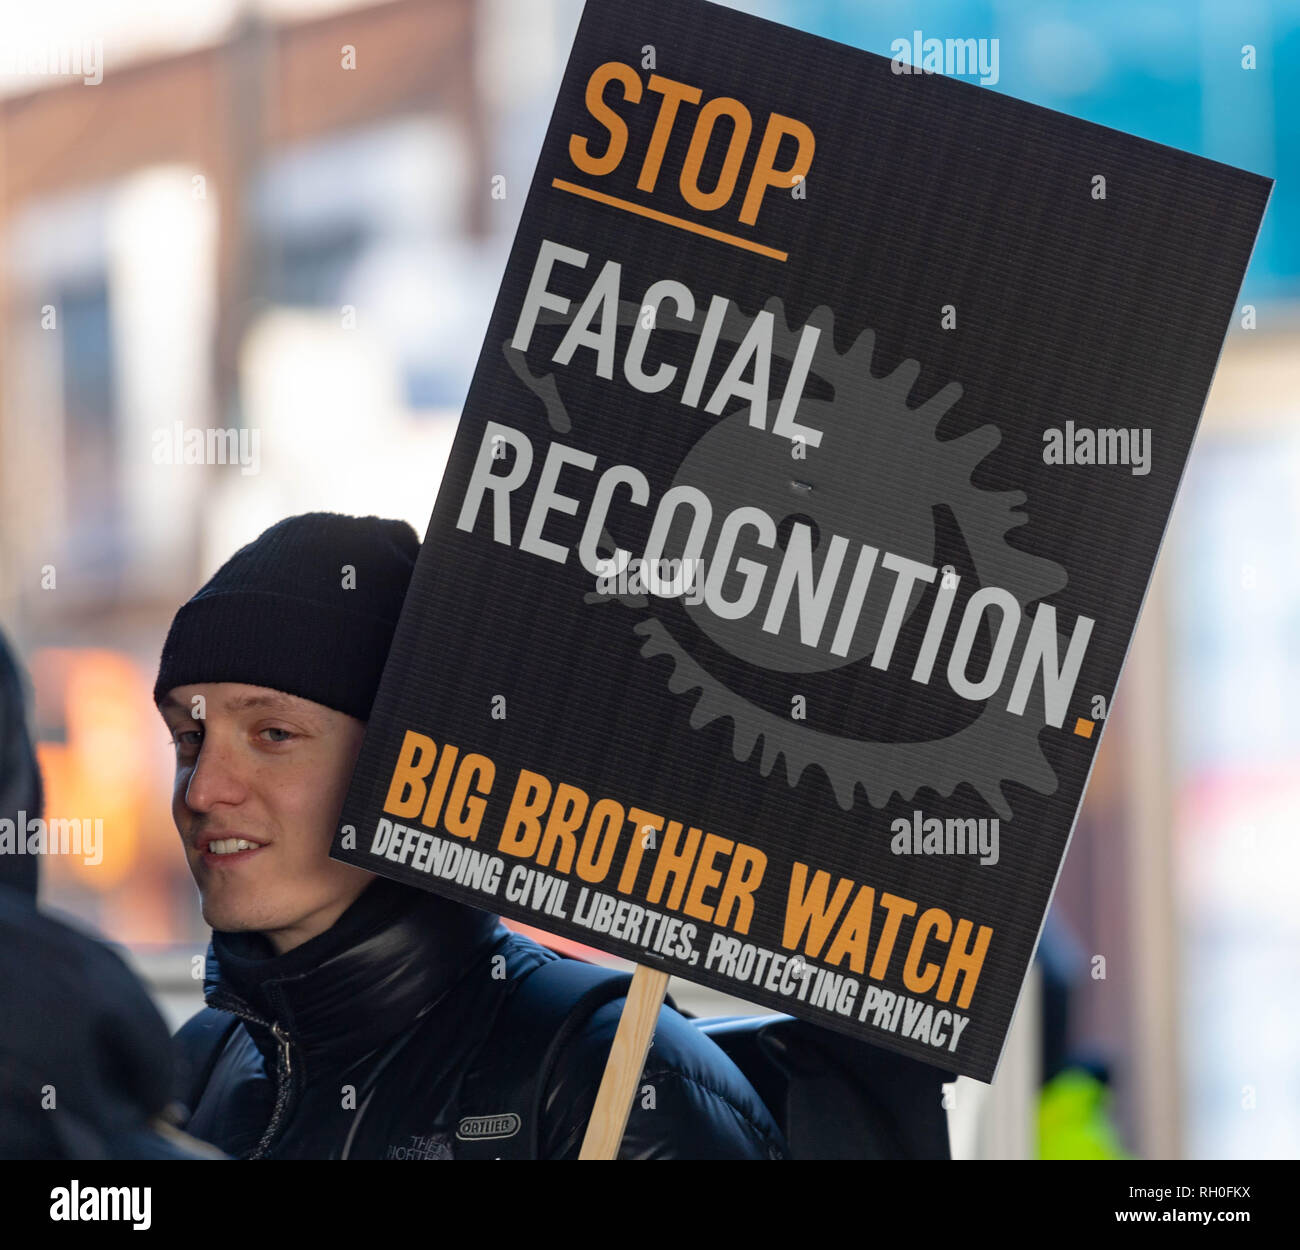 Romford, Essex, UK. 31st January 2019 Metropolitan Police trial live Facial recognition technology outside Romford Station. The police cameras scan passers by and check them against a 'watch list' in real time allowing them to apprehend any wanted people. A small number of protesters against the scheme protested outside Romford Station. Credit: Ian Davidson/Alamy Live News Stock Photo